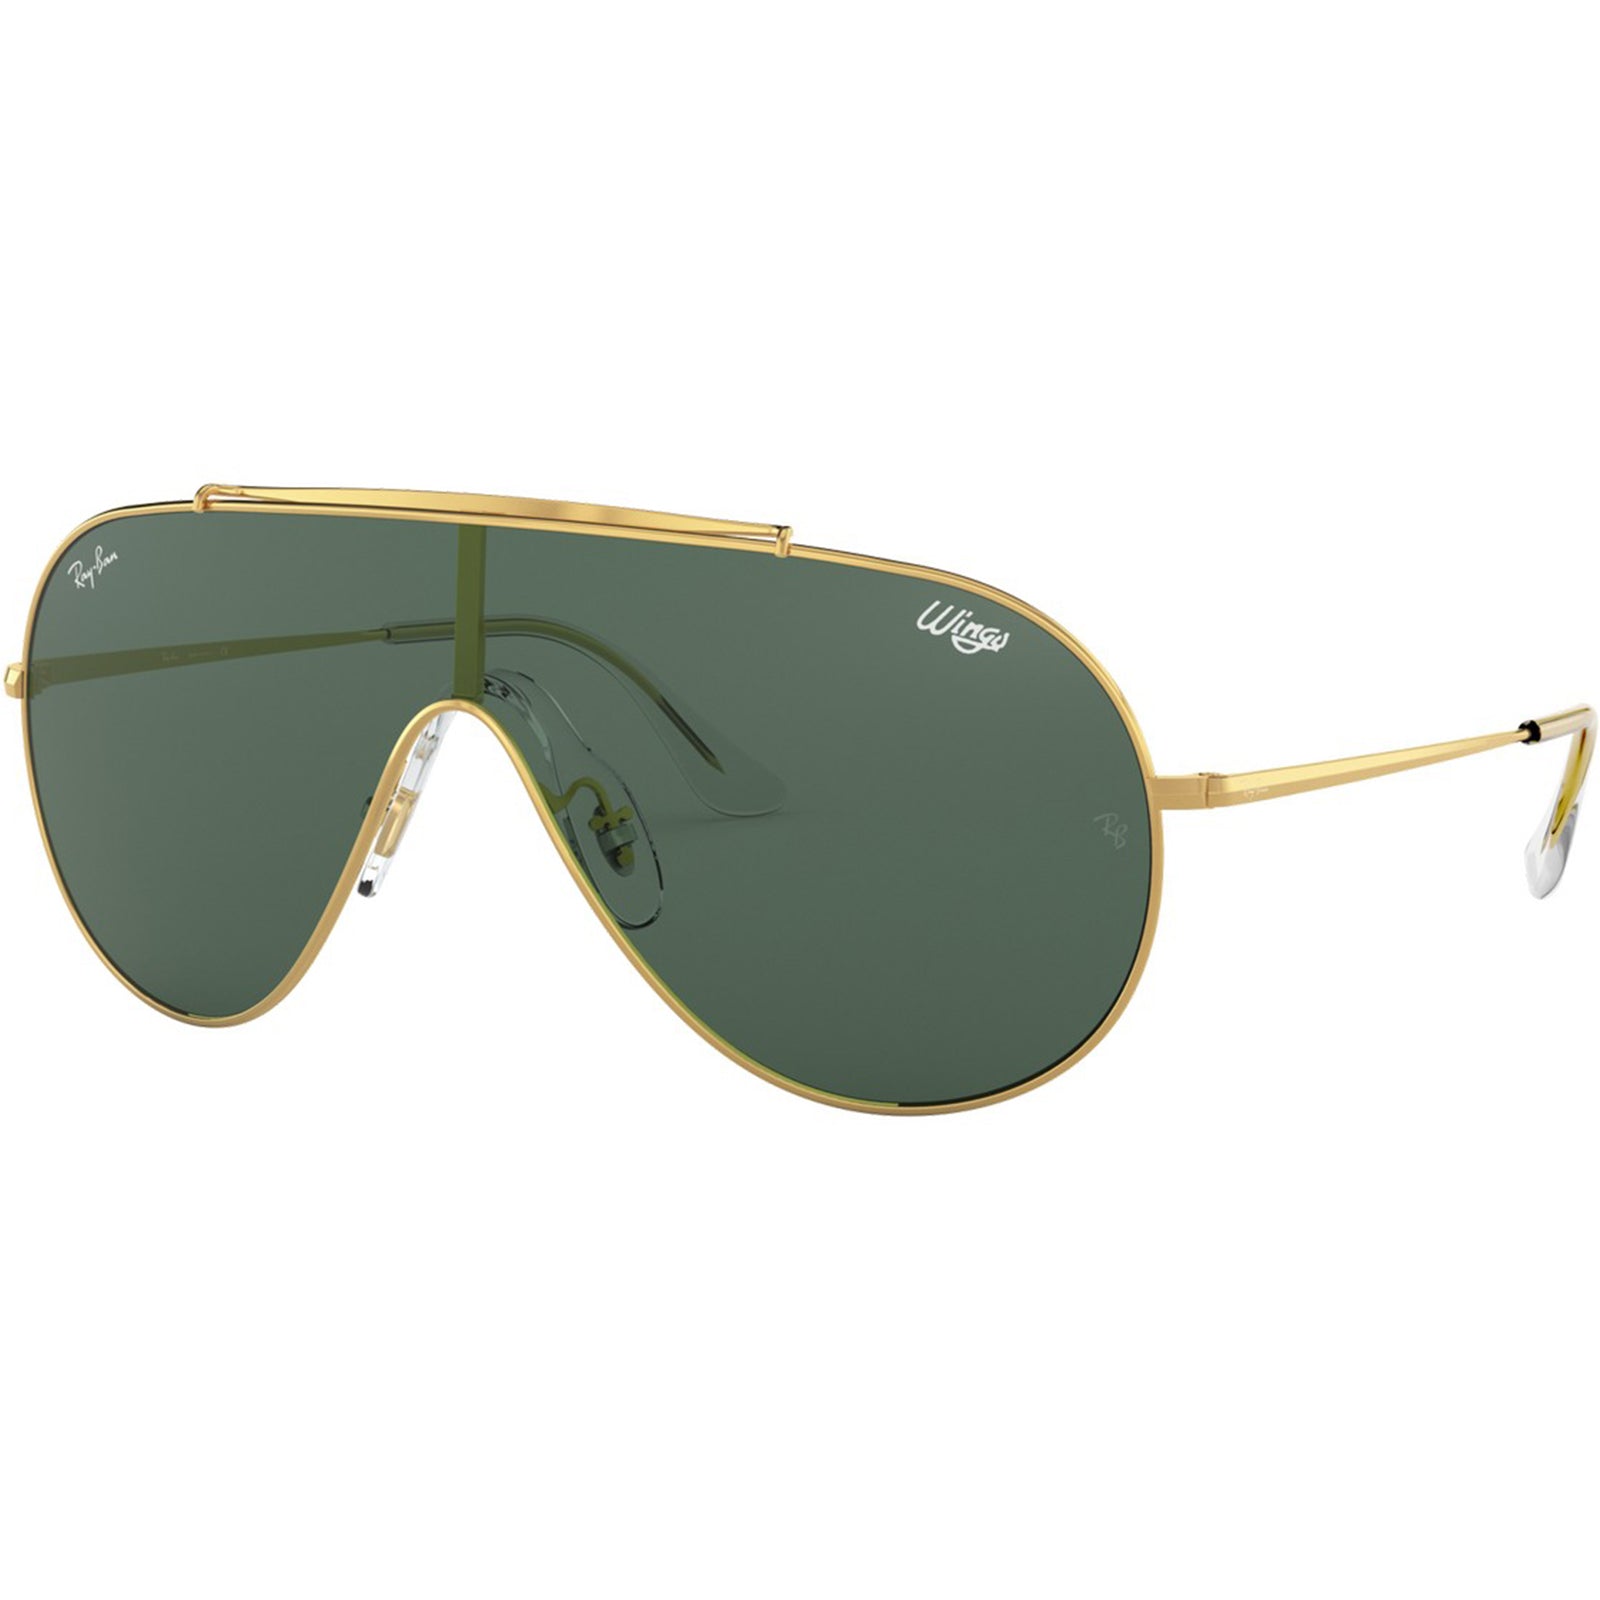 Ray-Ban Wings Adult Lifestyle Sunglasses-0RB3597